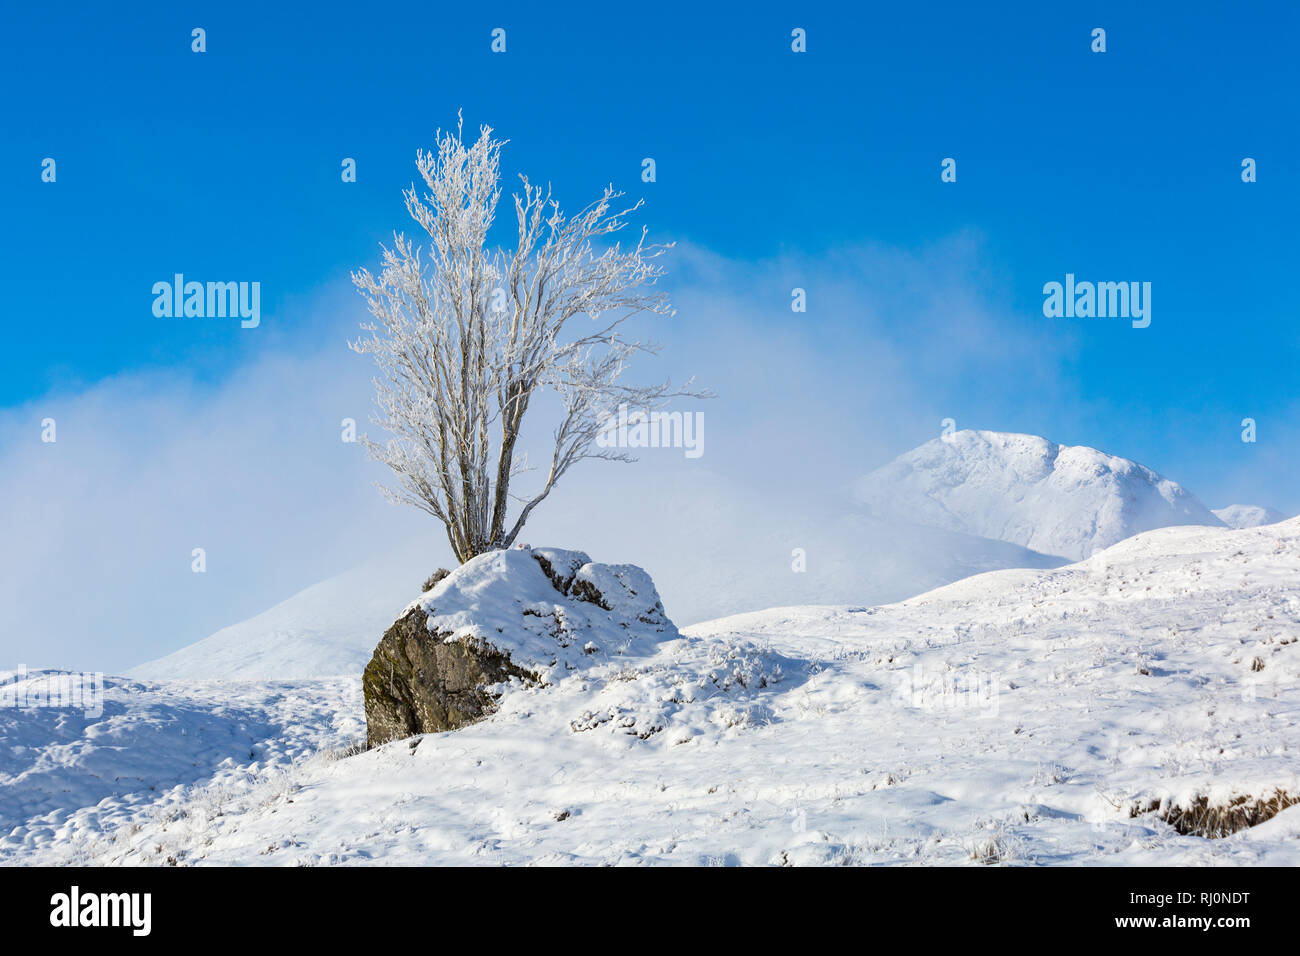 Bitterly cold morning with freezing fog and hoar frost turning the scene into a winter wonderland, tree on Rannoch Moor, Highlands, Scotland in Winter Stock Photo